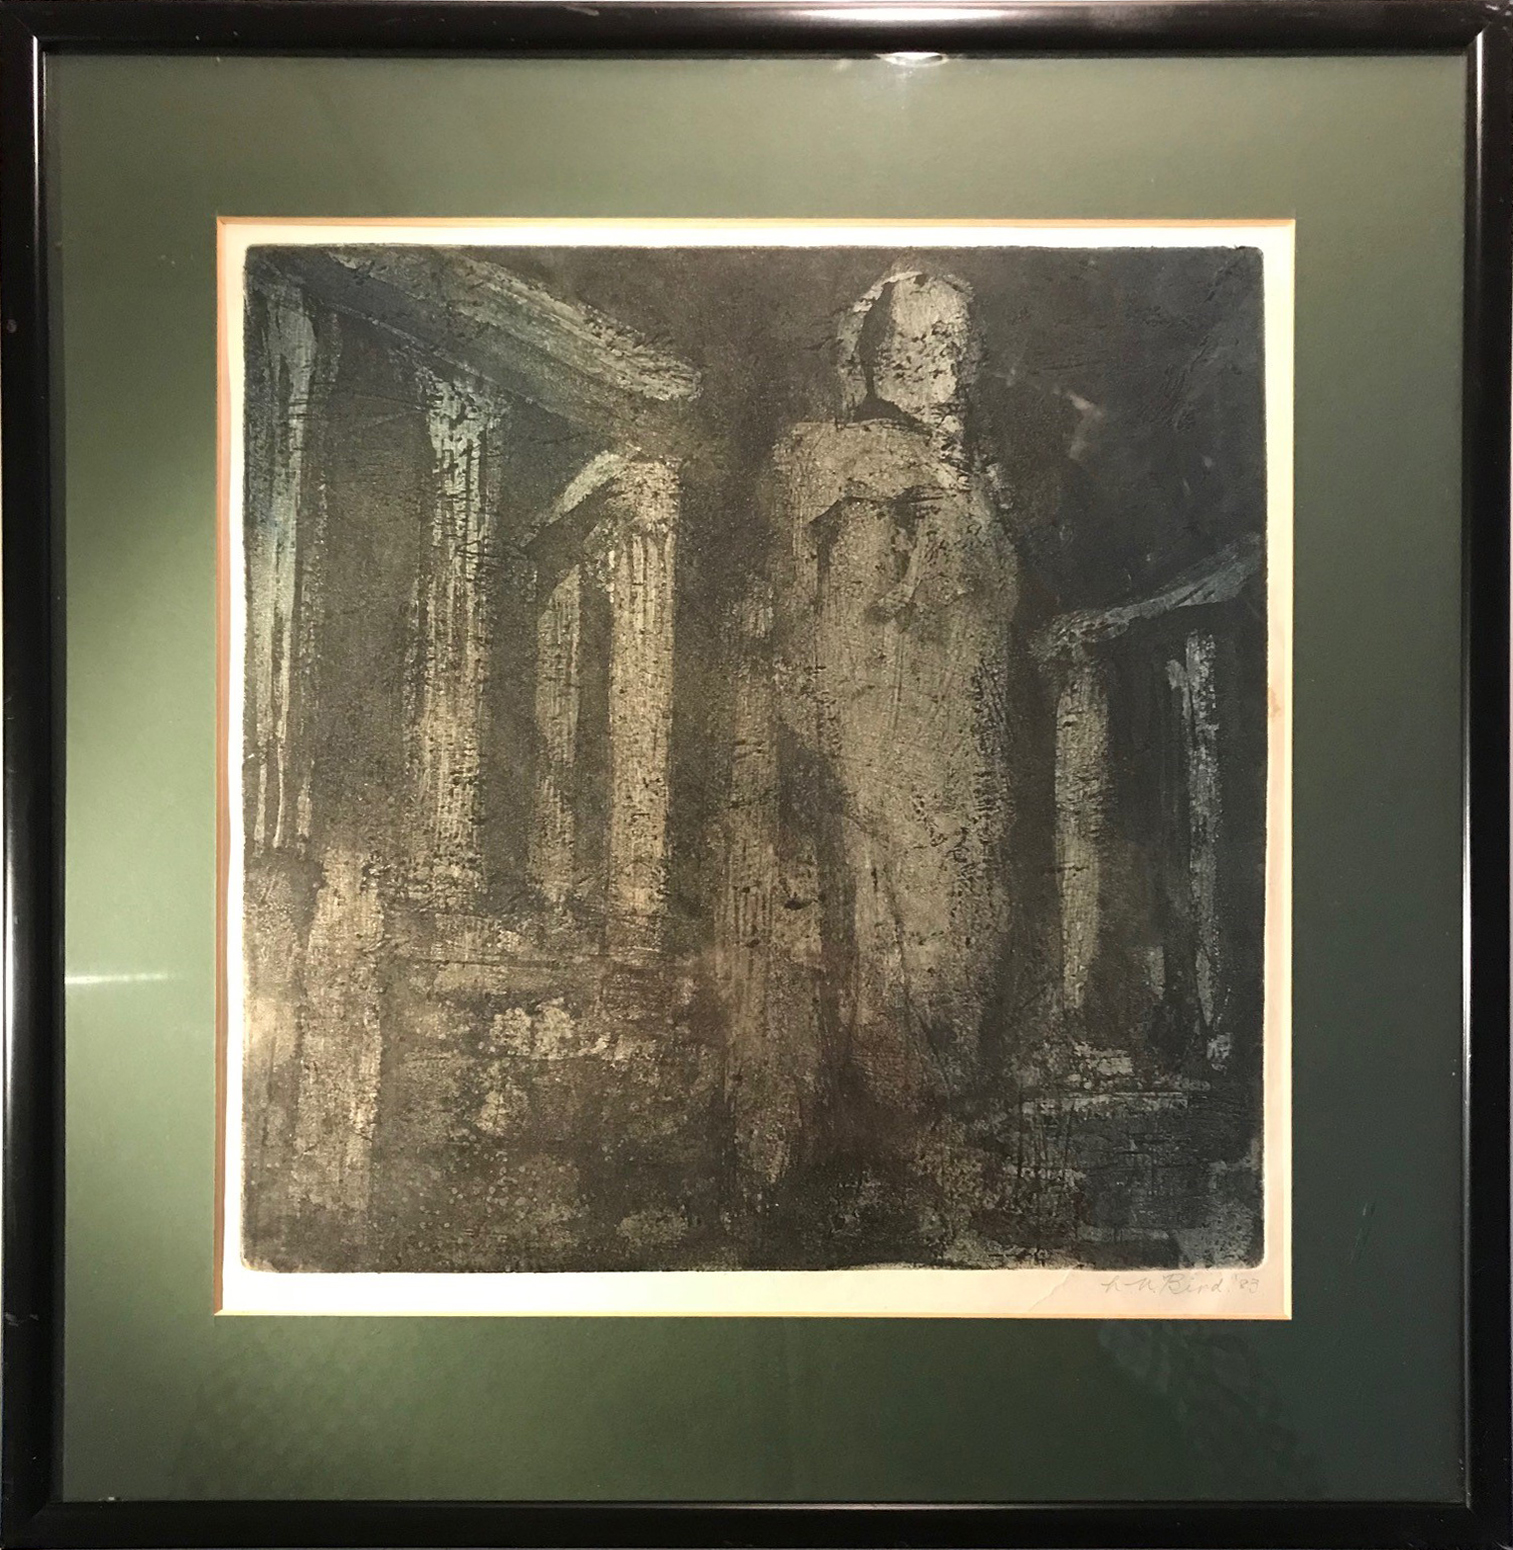 H.N. BIRD, 20TH CENTURY MODERN BRITISH ETCHING WITH AQUATINT Classical Ruins, signed in pencil lower